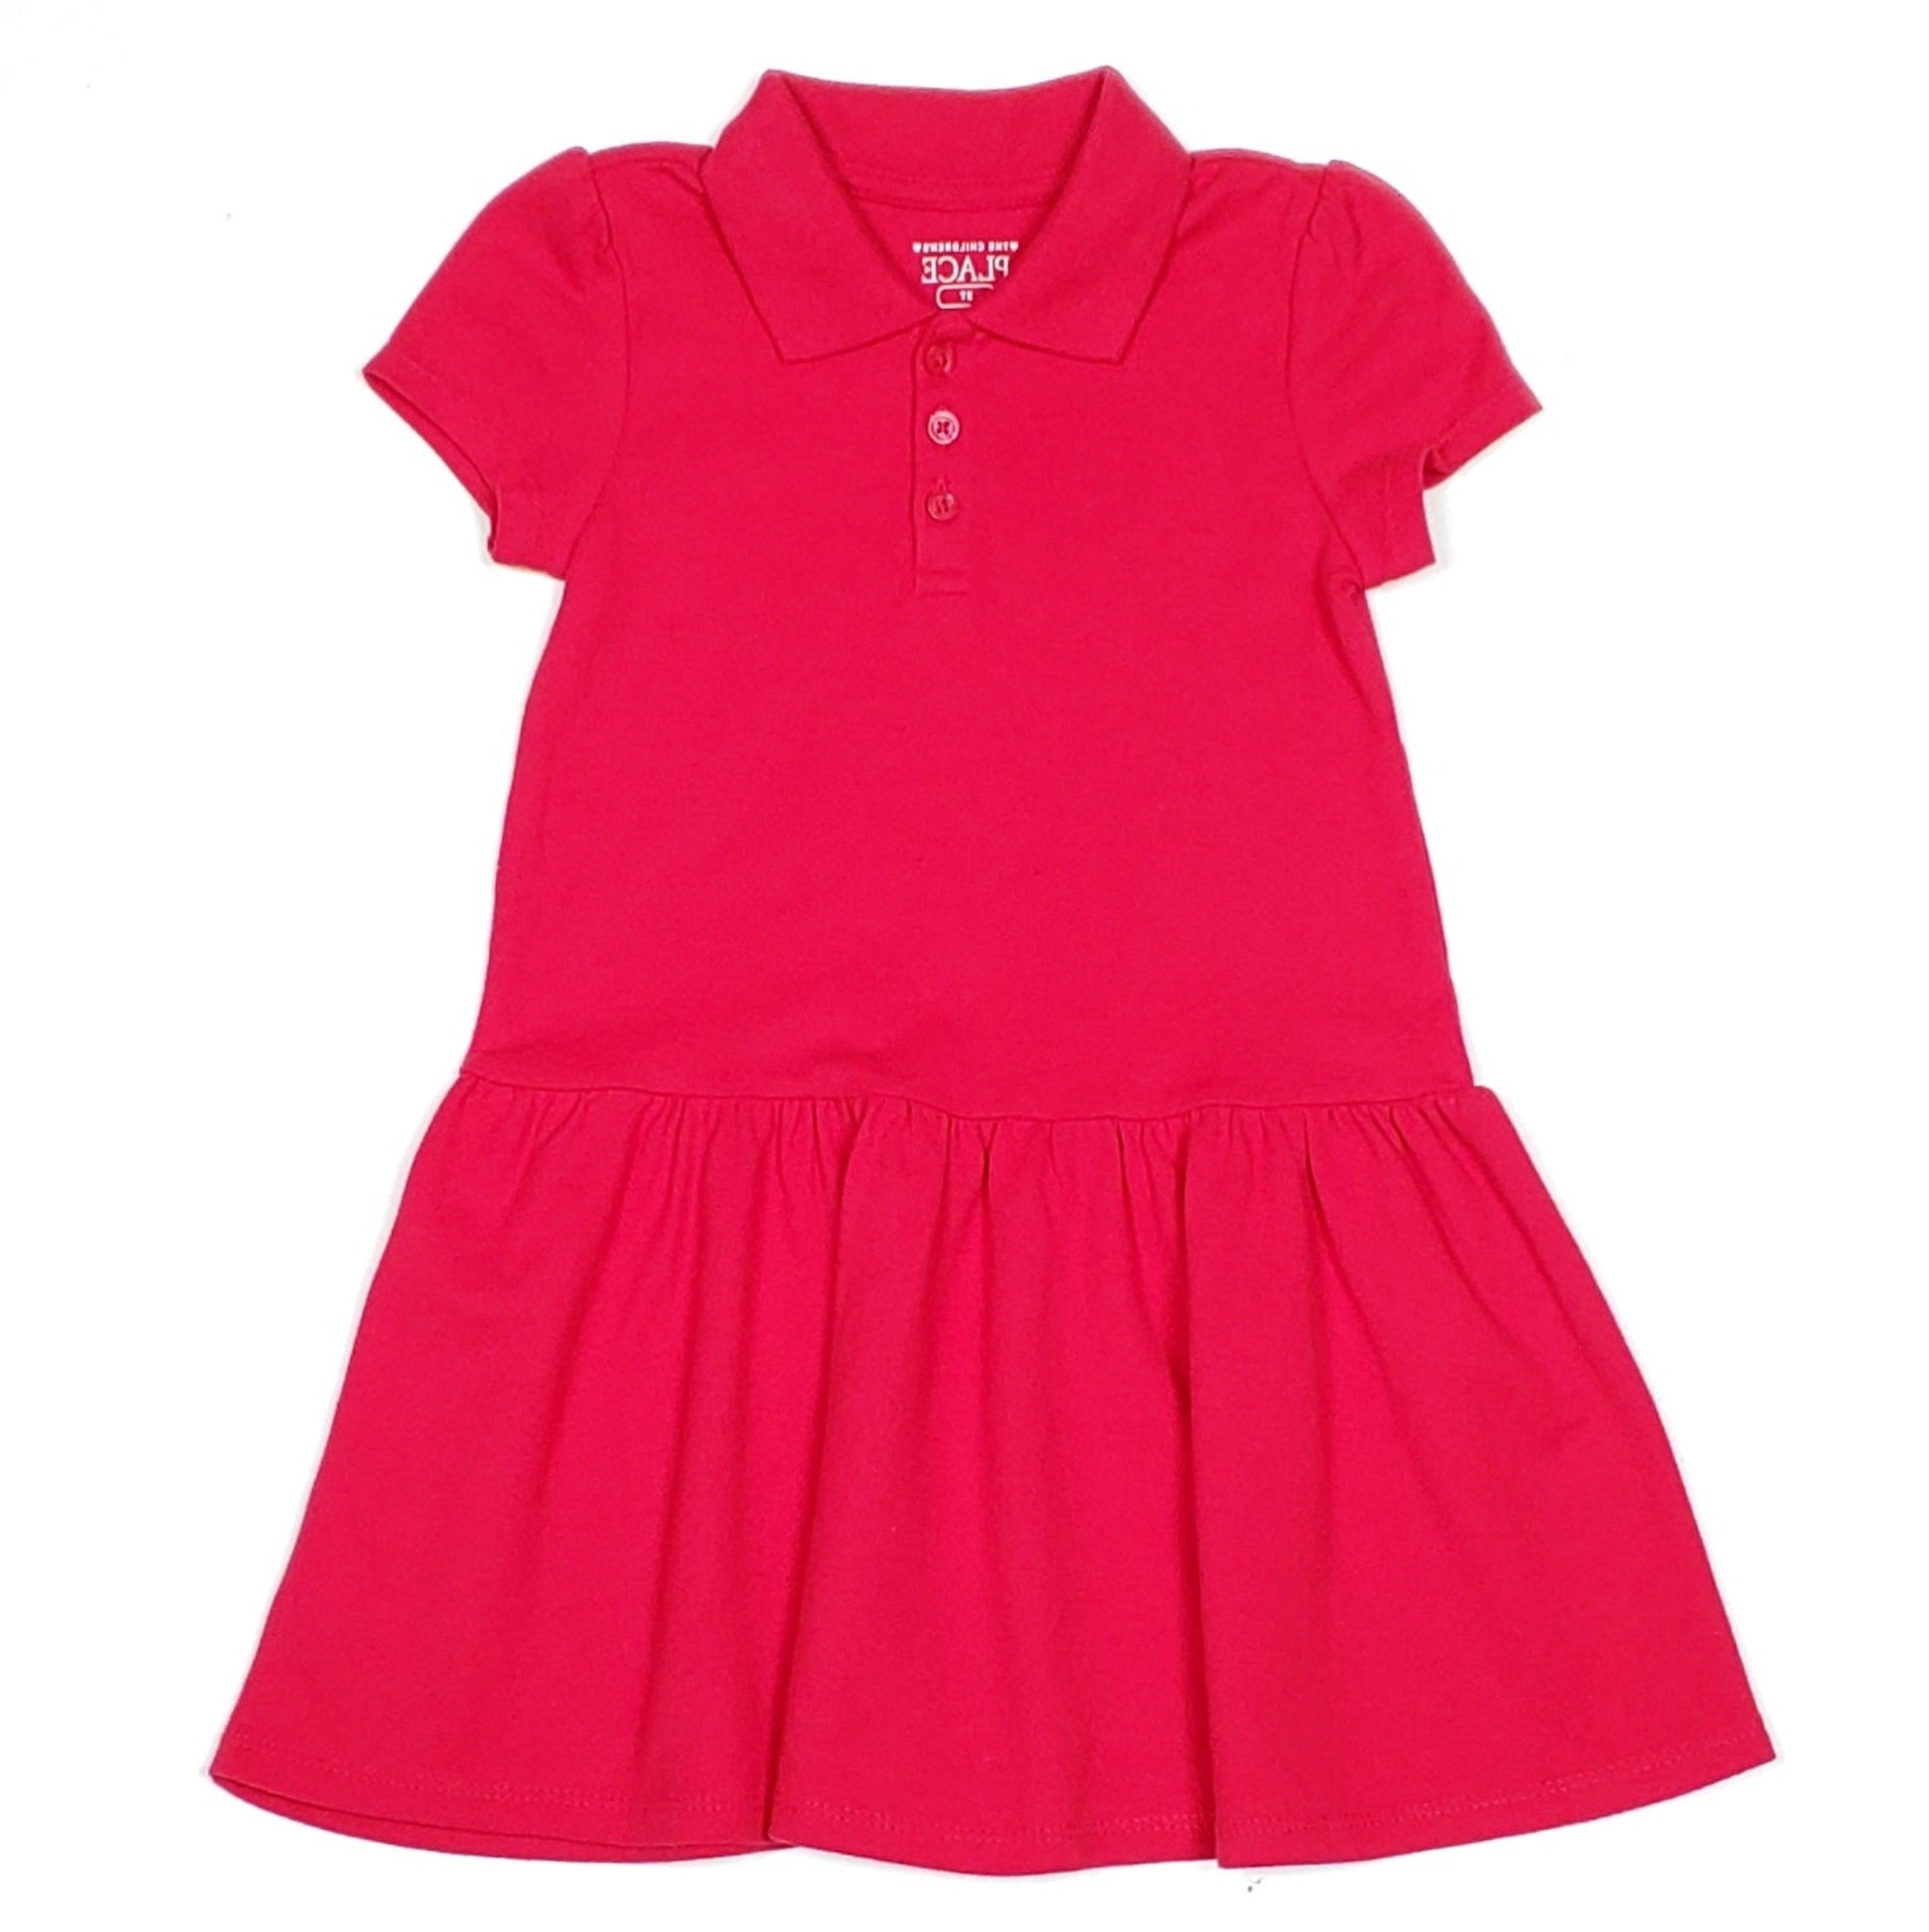 Childrens Place Girls Red Polo Dress 3T NWT View 1